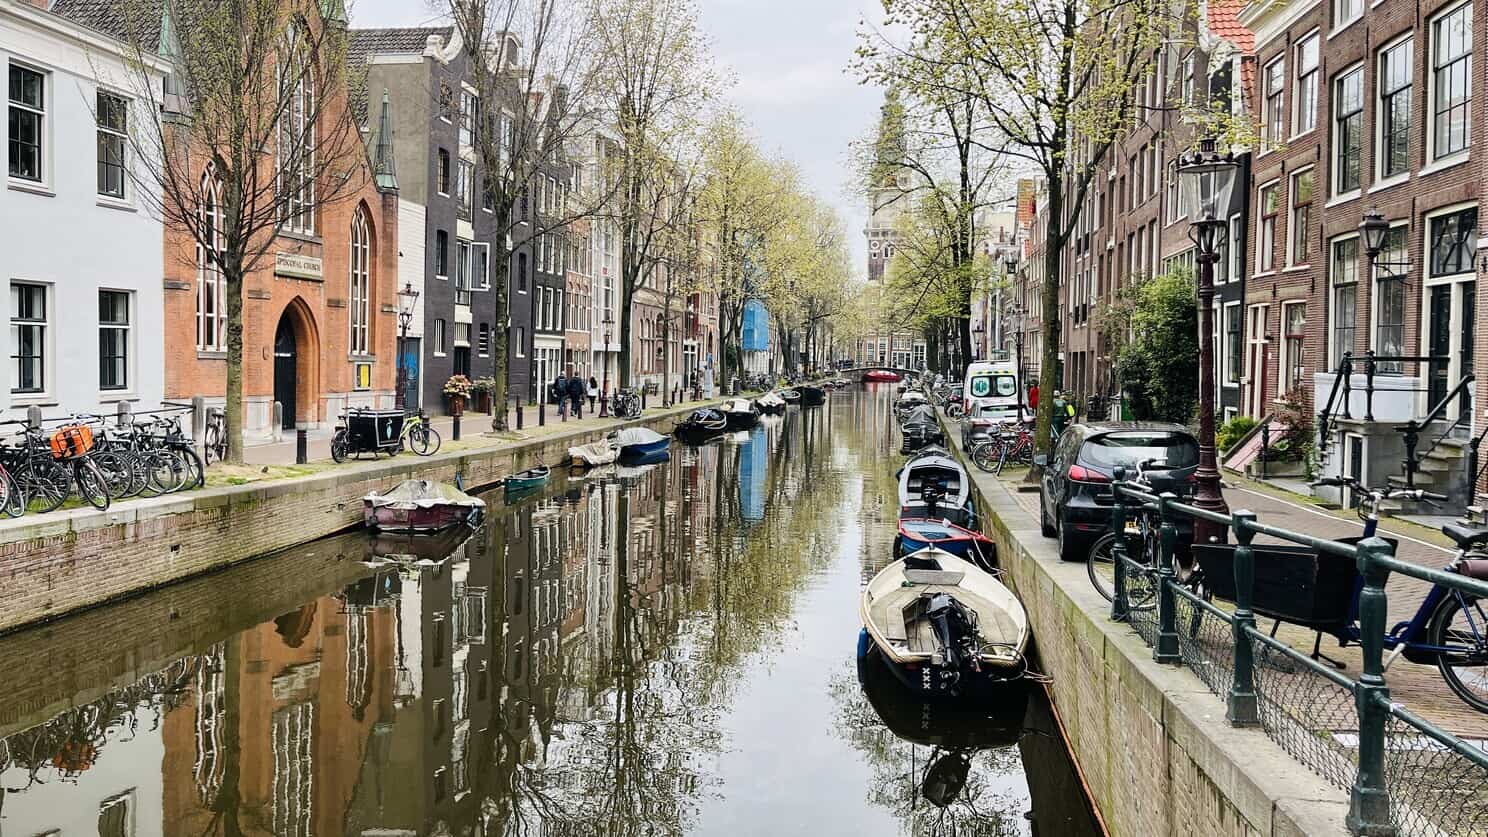 Buildings separated by river with small boats in Amsterdam